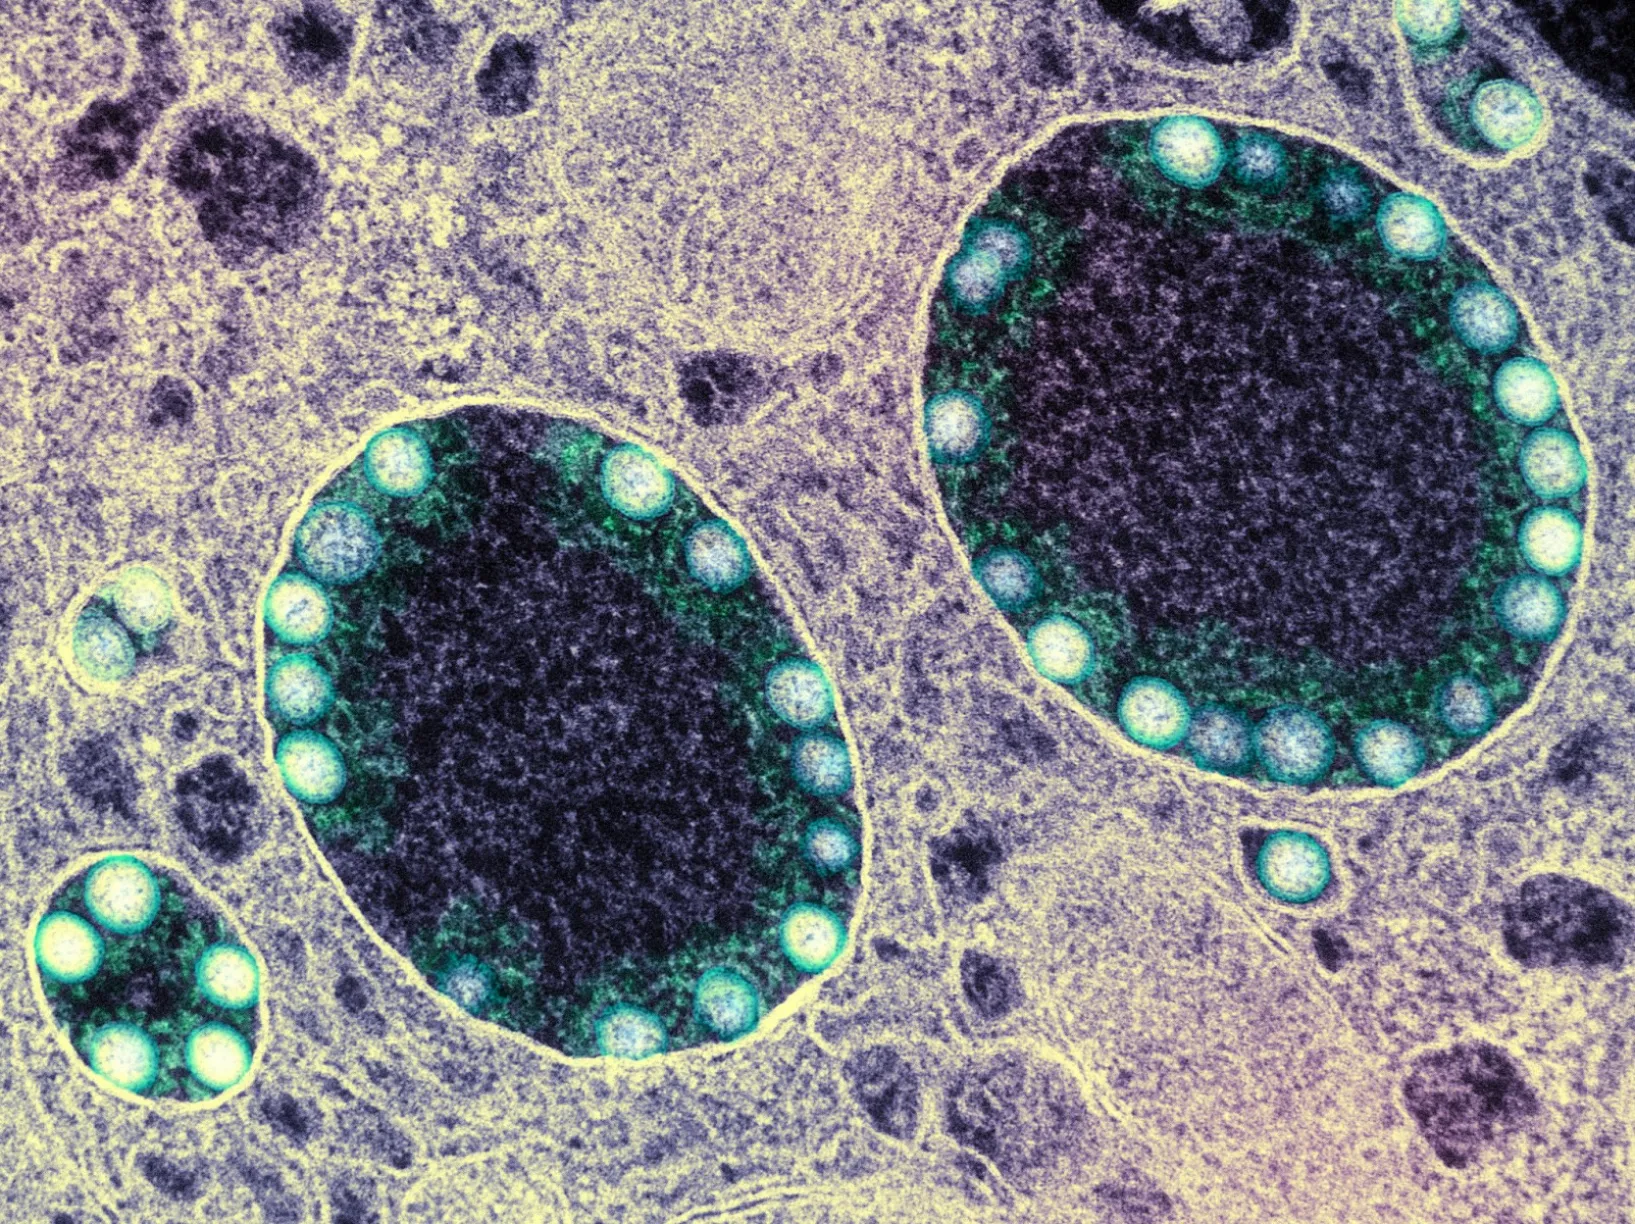 Neutralizing antibodies that block viral particles’ entry into host cells are considered the gold standard of protection against COVID-19 infection. Above, SARS-CoV-2 virus particles are visible inside a heavily infected nasal cell.